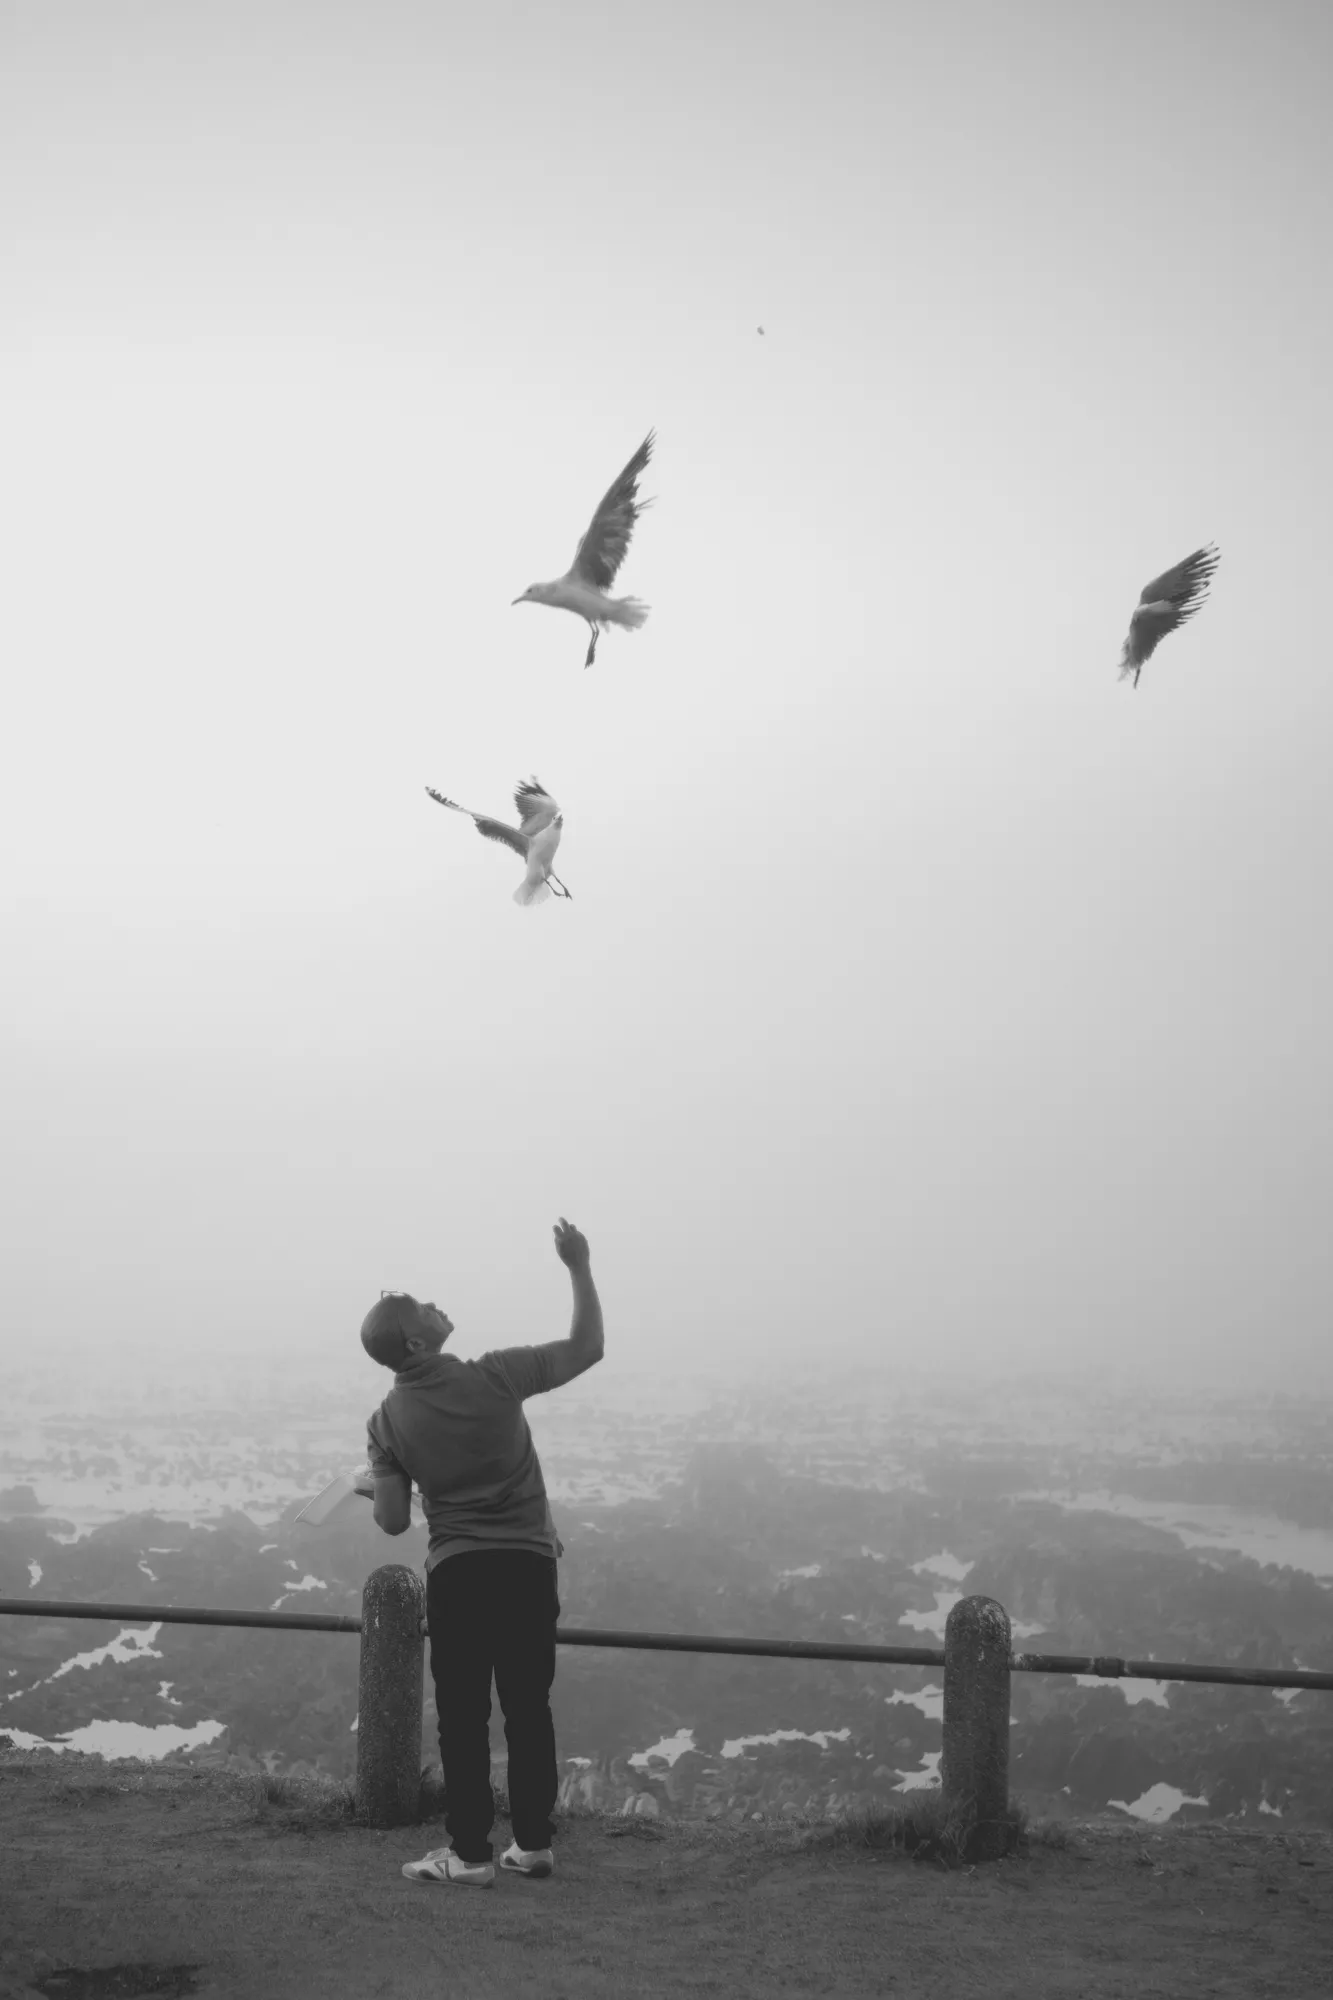 2022-02-15 - Cape Town - Man throws food up at seagulls on a misty day